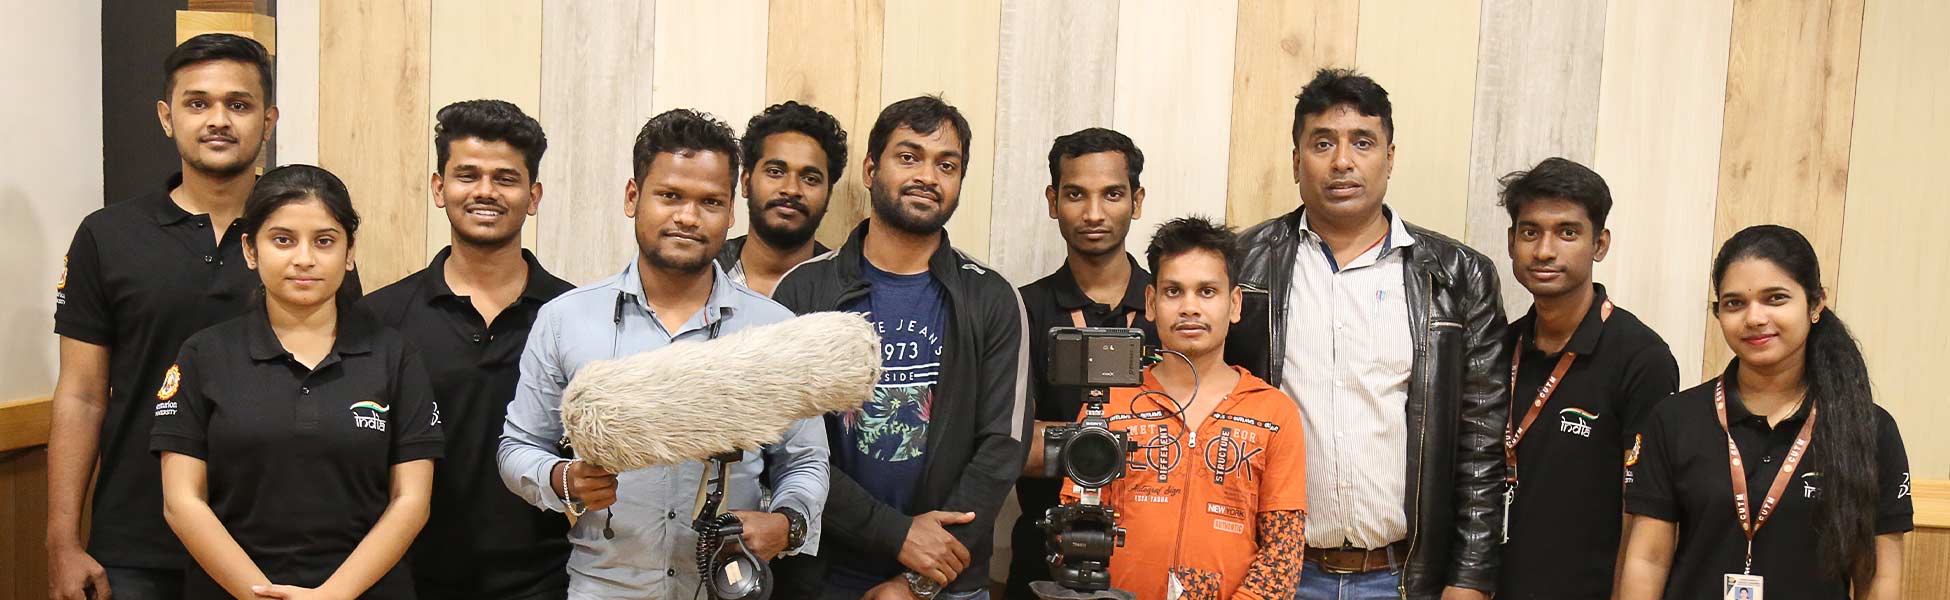 film production house in Akola, video production house in Akola, tv production house in Akola, production house in Akola, film production company in Akola, video production company in Akola, tv production company in Akola, production company in Akola